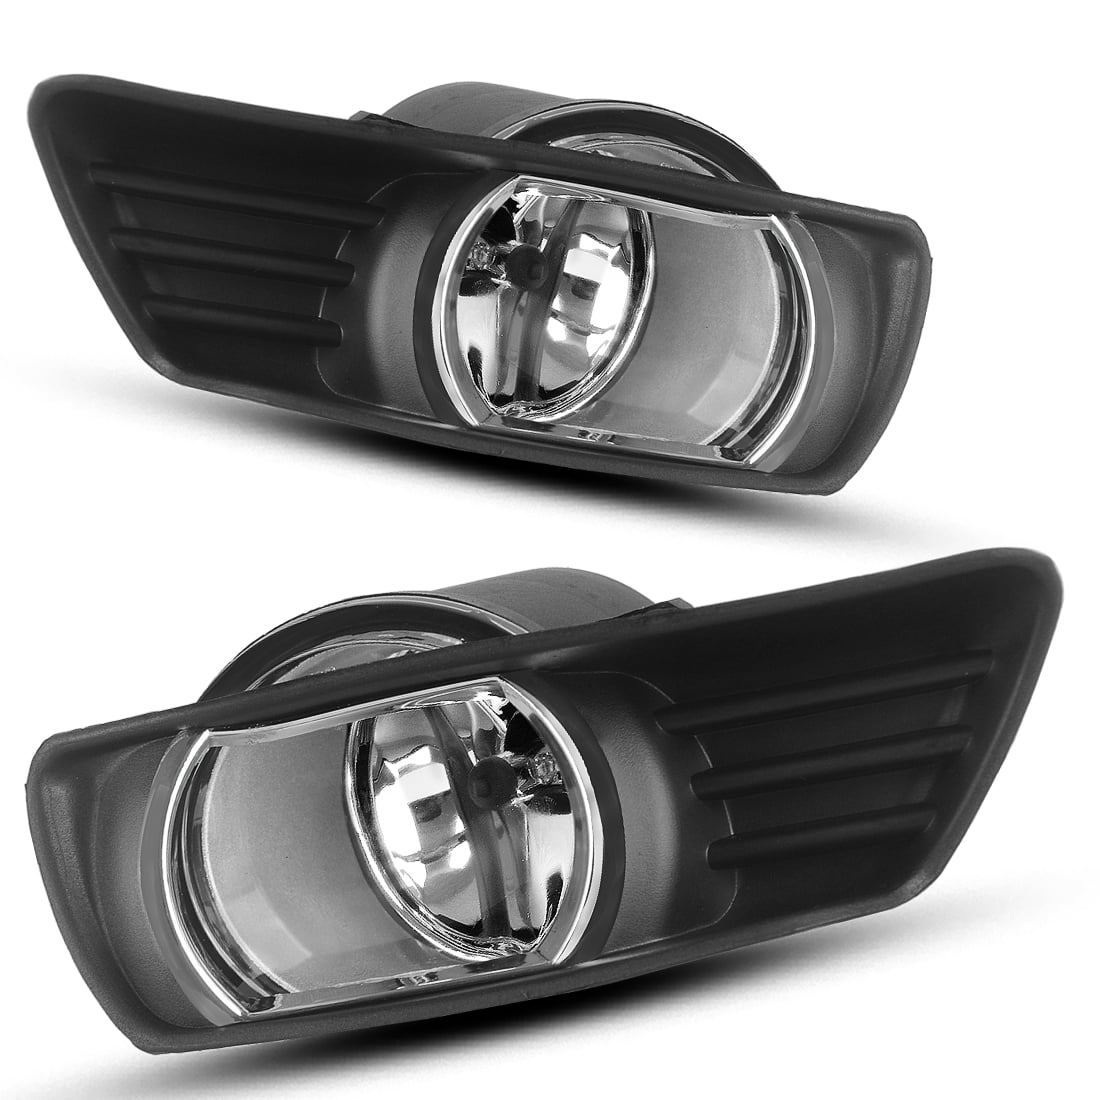 For 2007-2009 Toyota Camry HeadLights Head Lamps Black/Clear Left+Right Set 2PCs